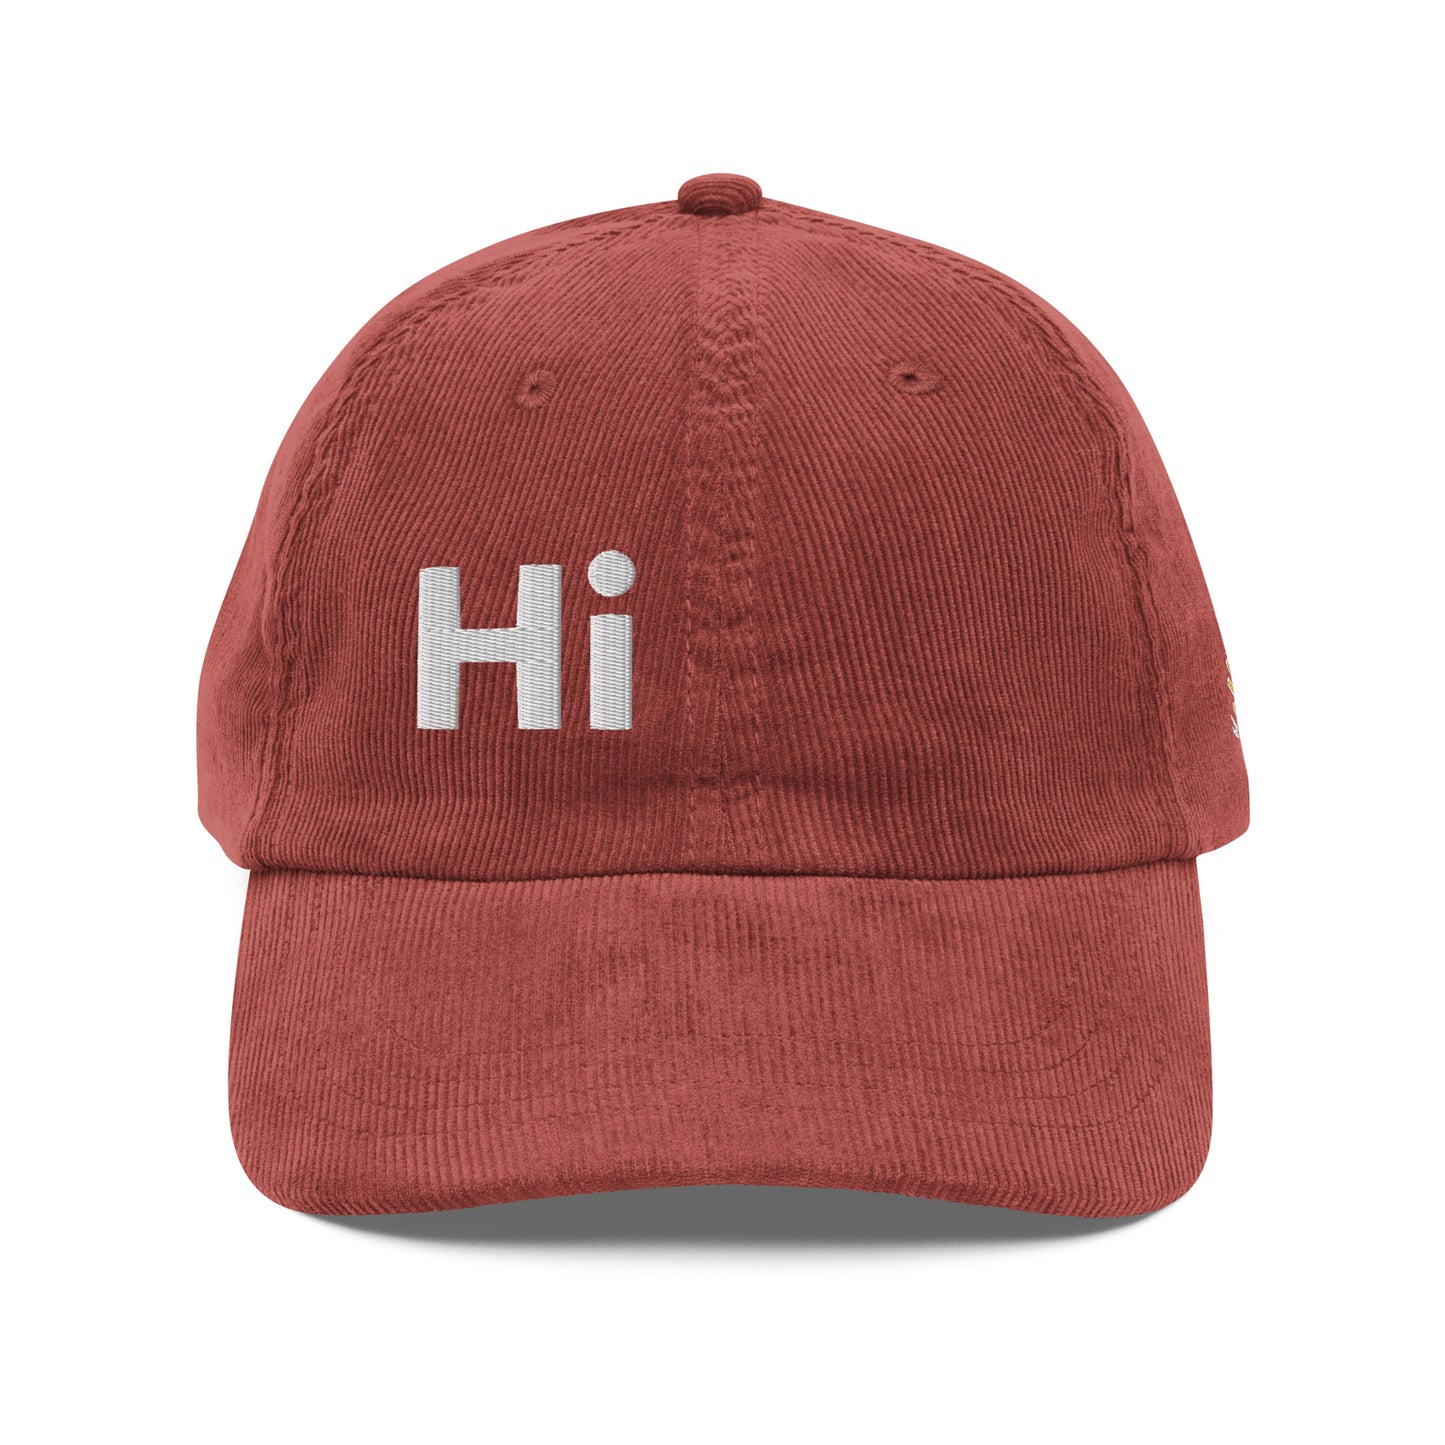 Hi Shalom Hebrew Corduroy Hat by Happy interactions in Maroon